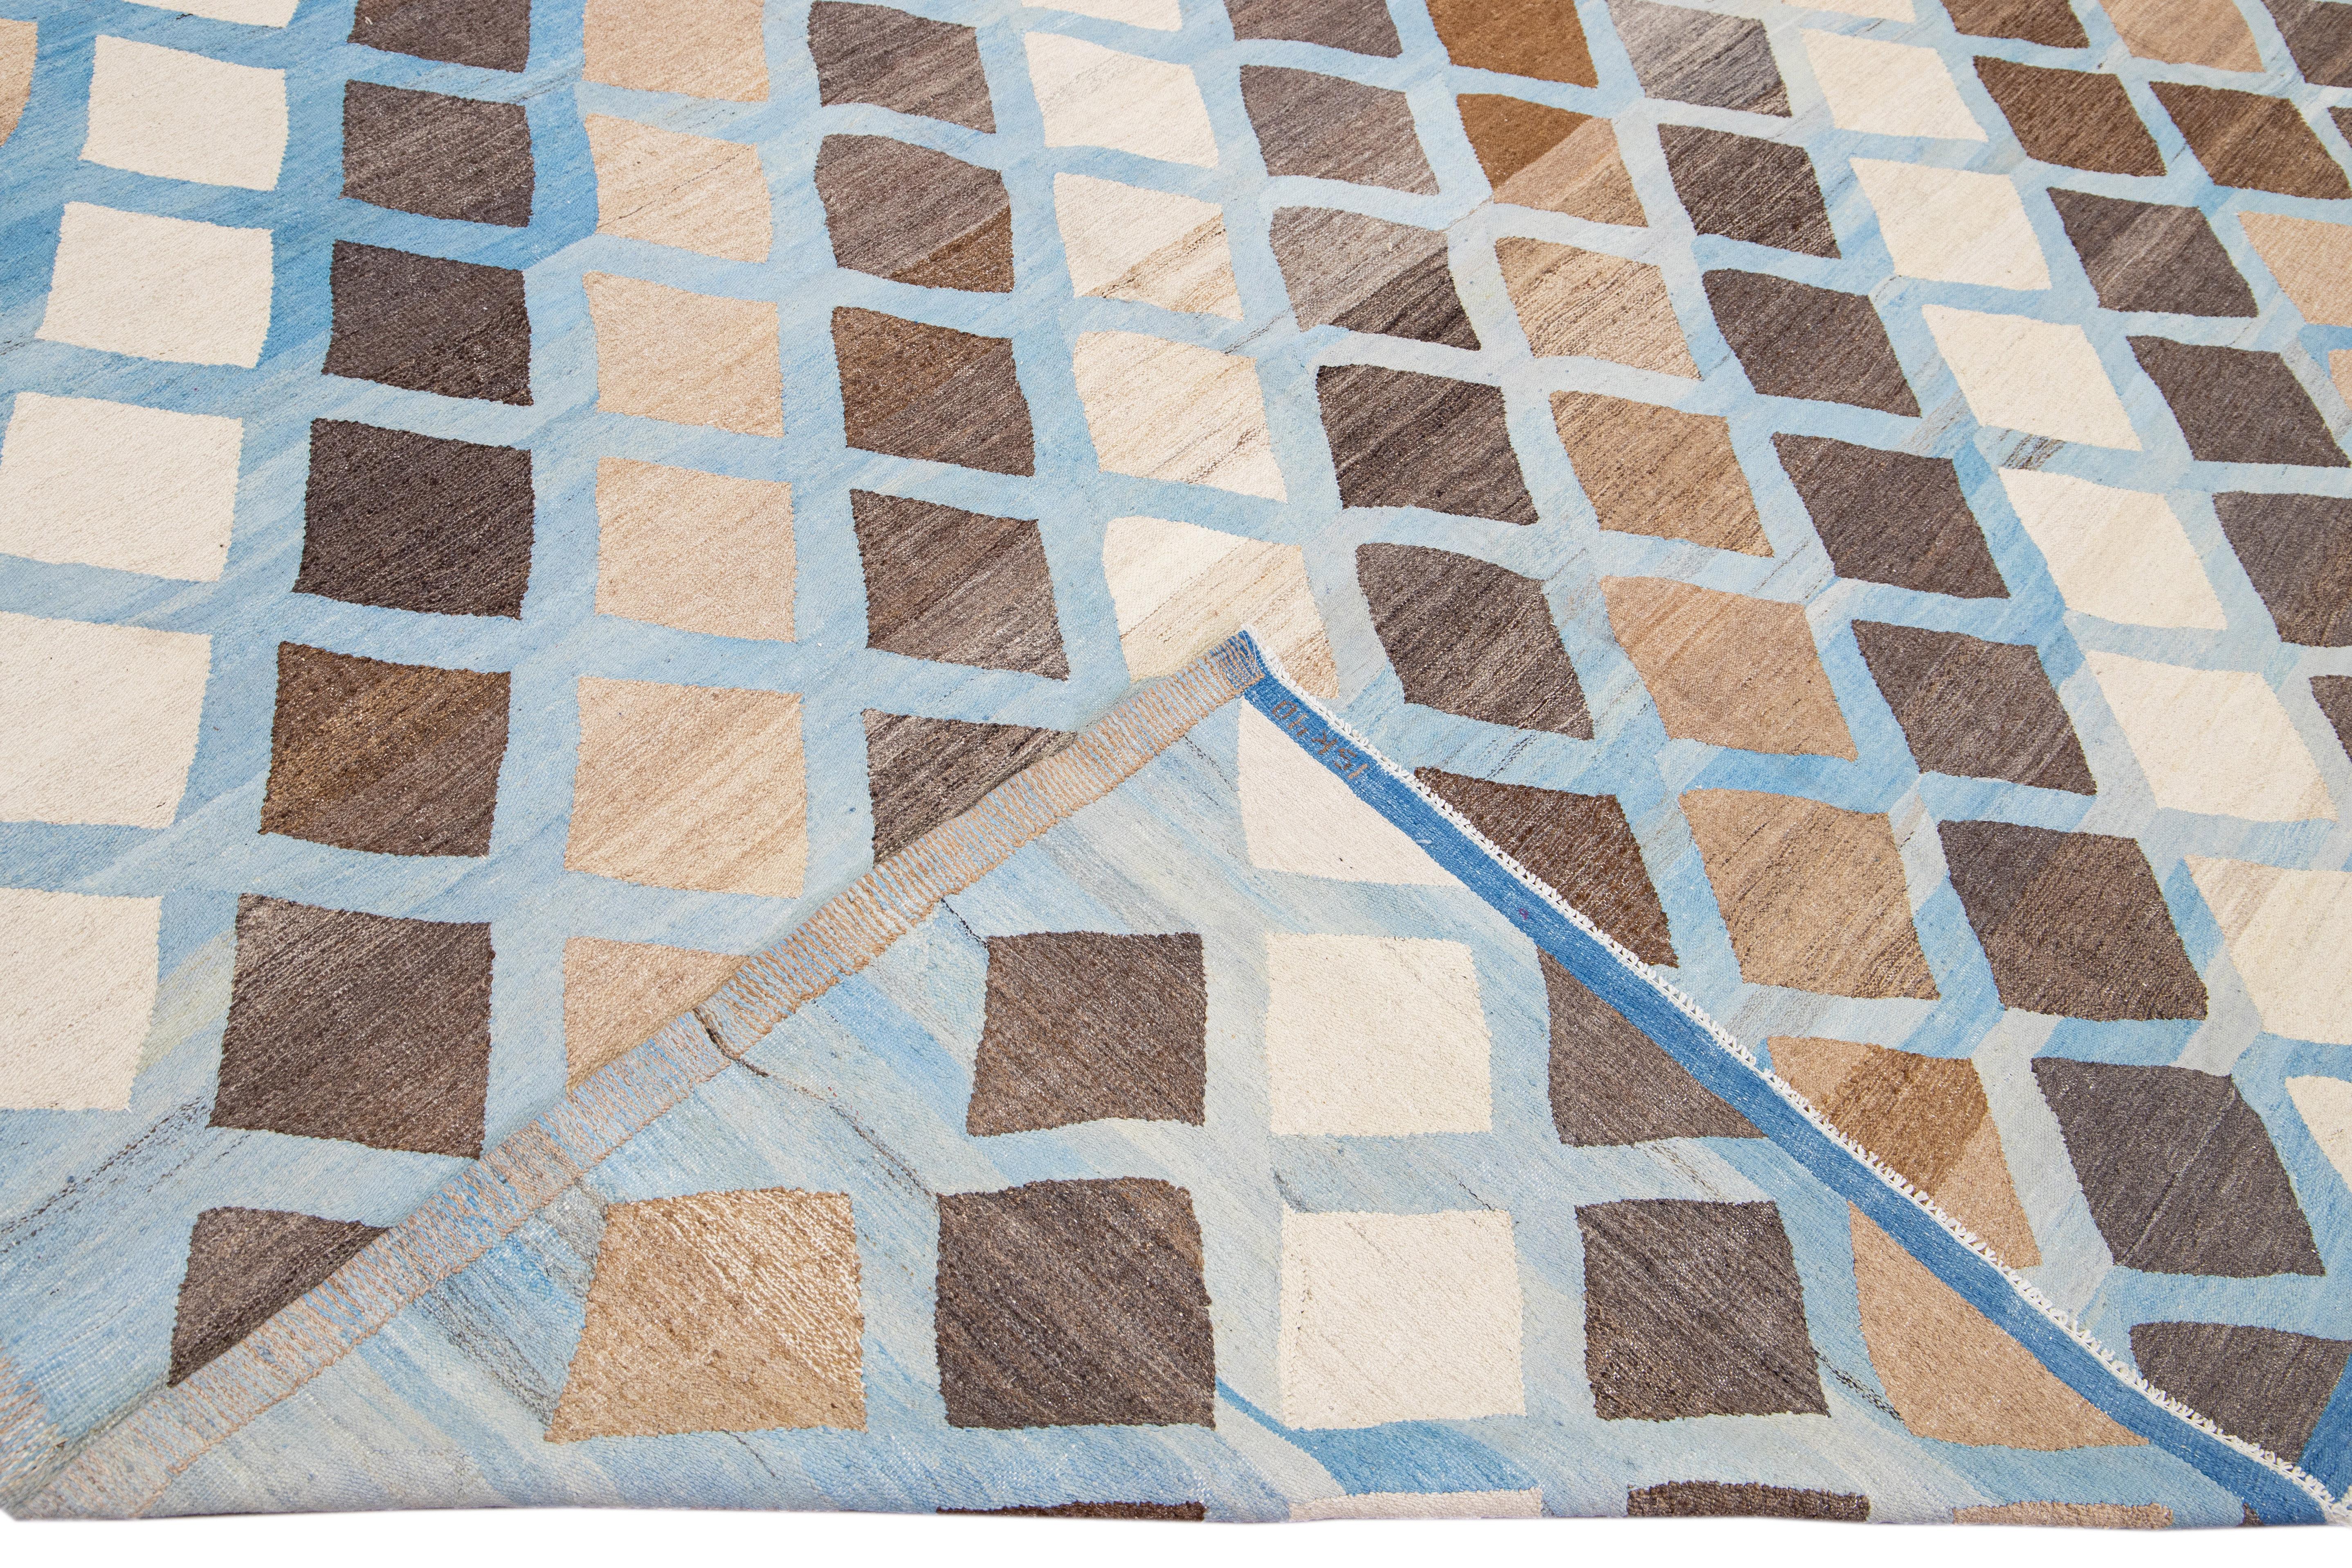 Beautiful modern flat-weave handmade wool rug. This Kilim rug has a blue field with accents of gray and brown in a gorgeous geometric expressionist design.

This rug measures: 12'5 x 17'7